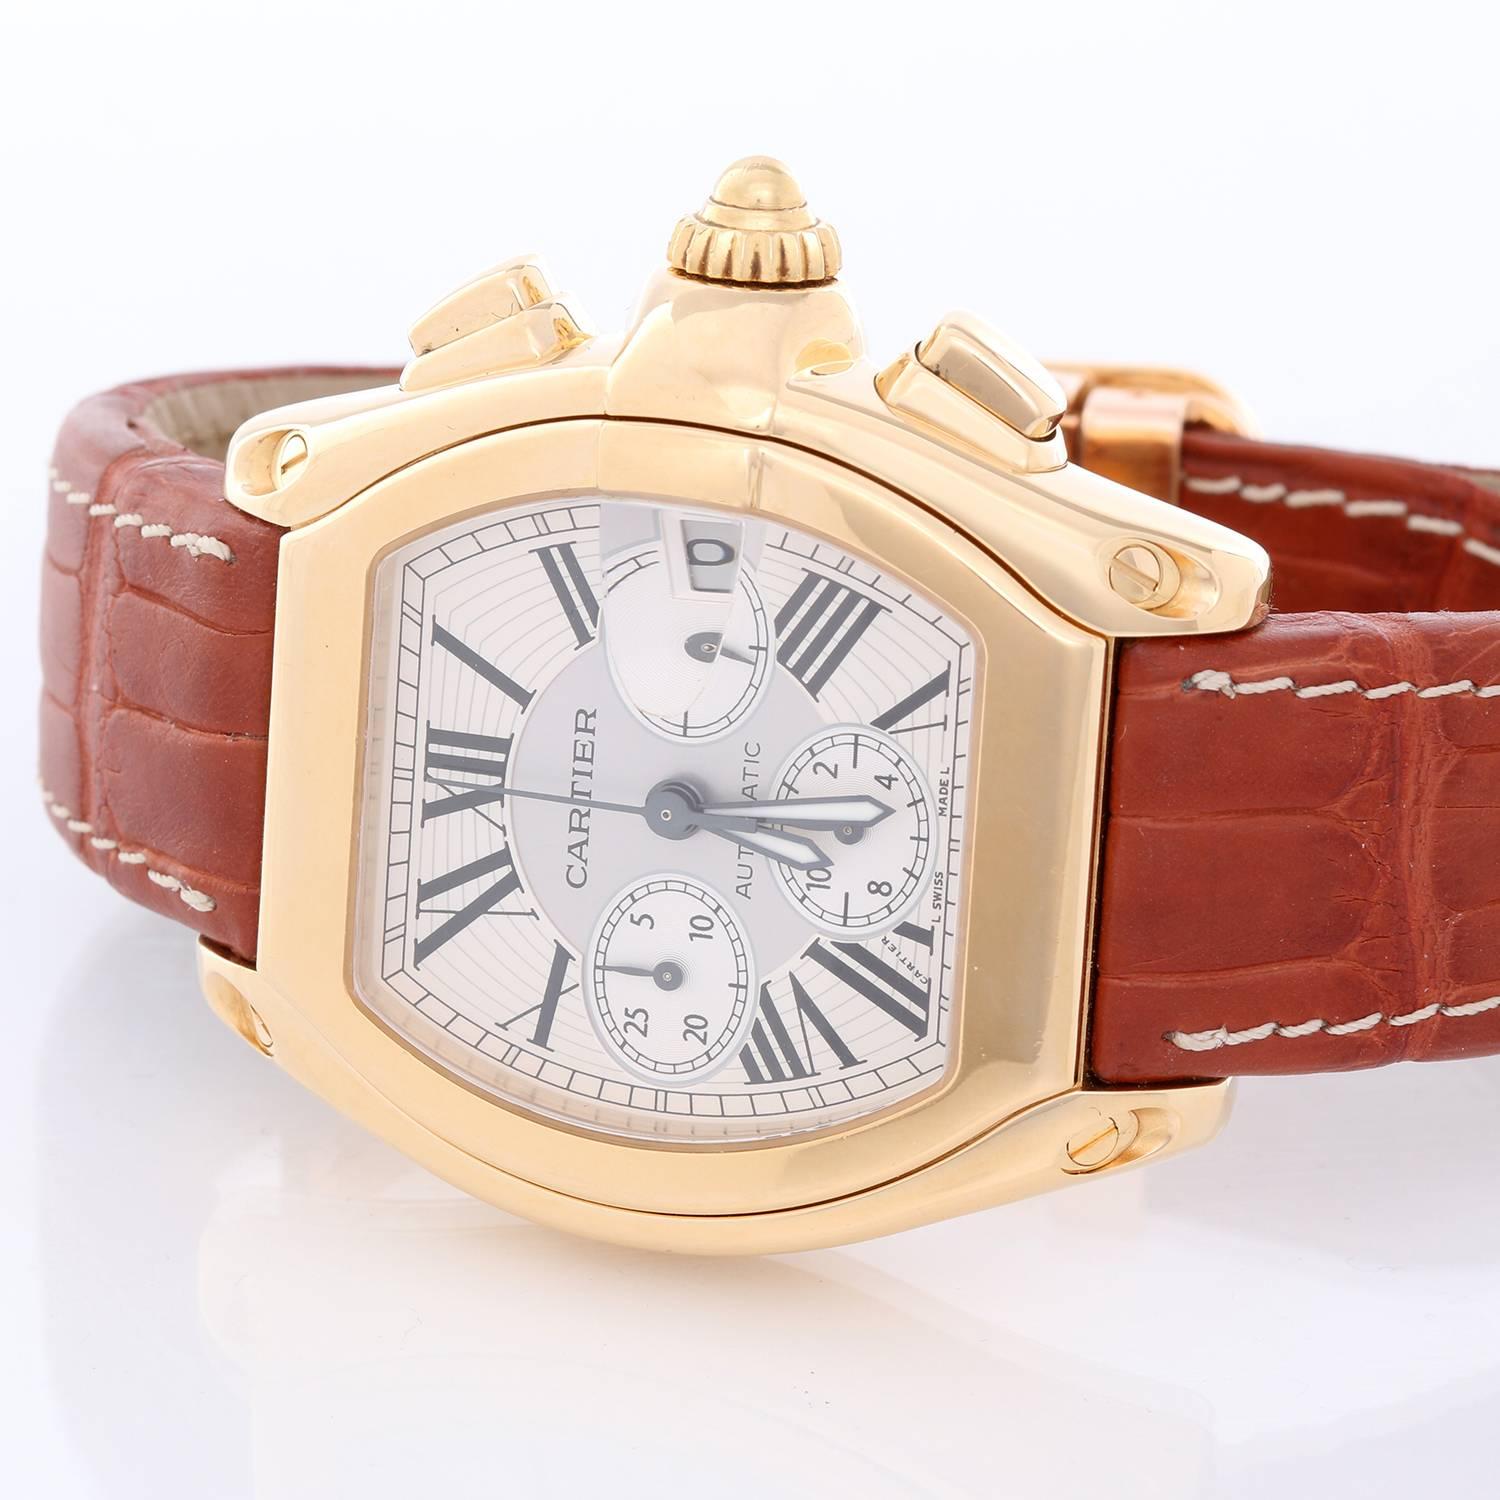 Cartier Roadster XL Chronograph 18k Yellow Gold Men's Watch W62021Y3 -  Automatic winding; chronograph with date. 18k yellow gold case (43 mm x 47mm). Two-tone silver dial with black Roman numerals. Cartier strap band with 18k yellow gold deployant